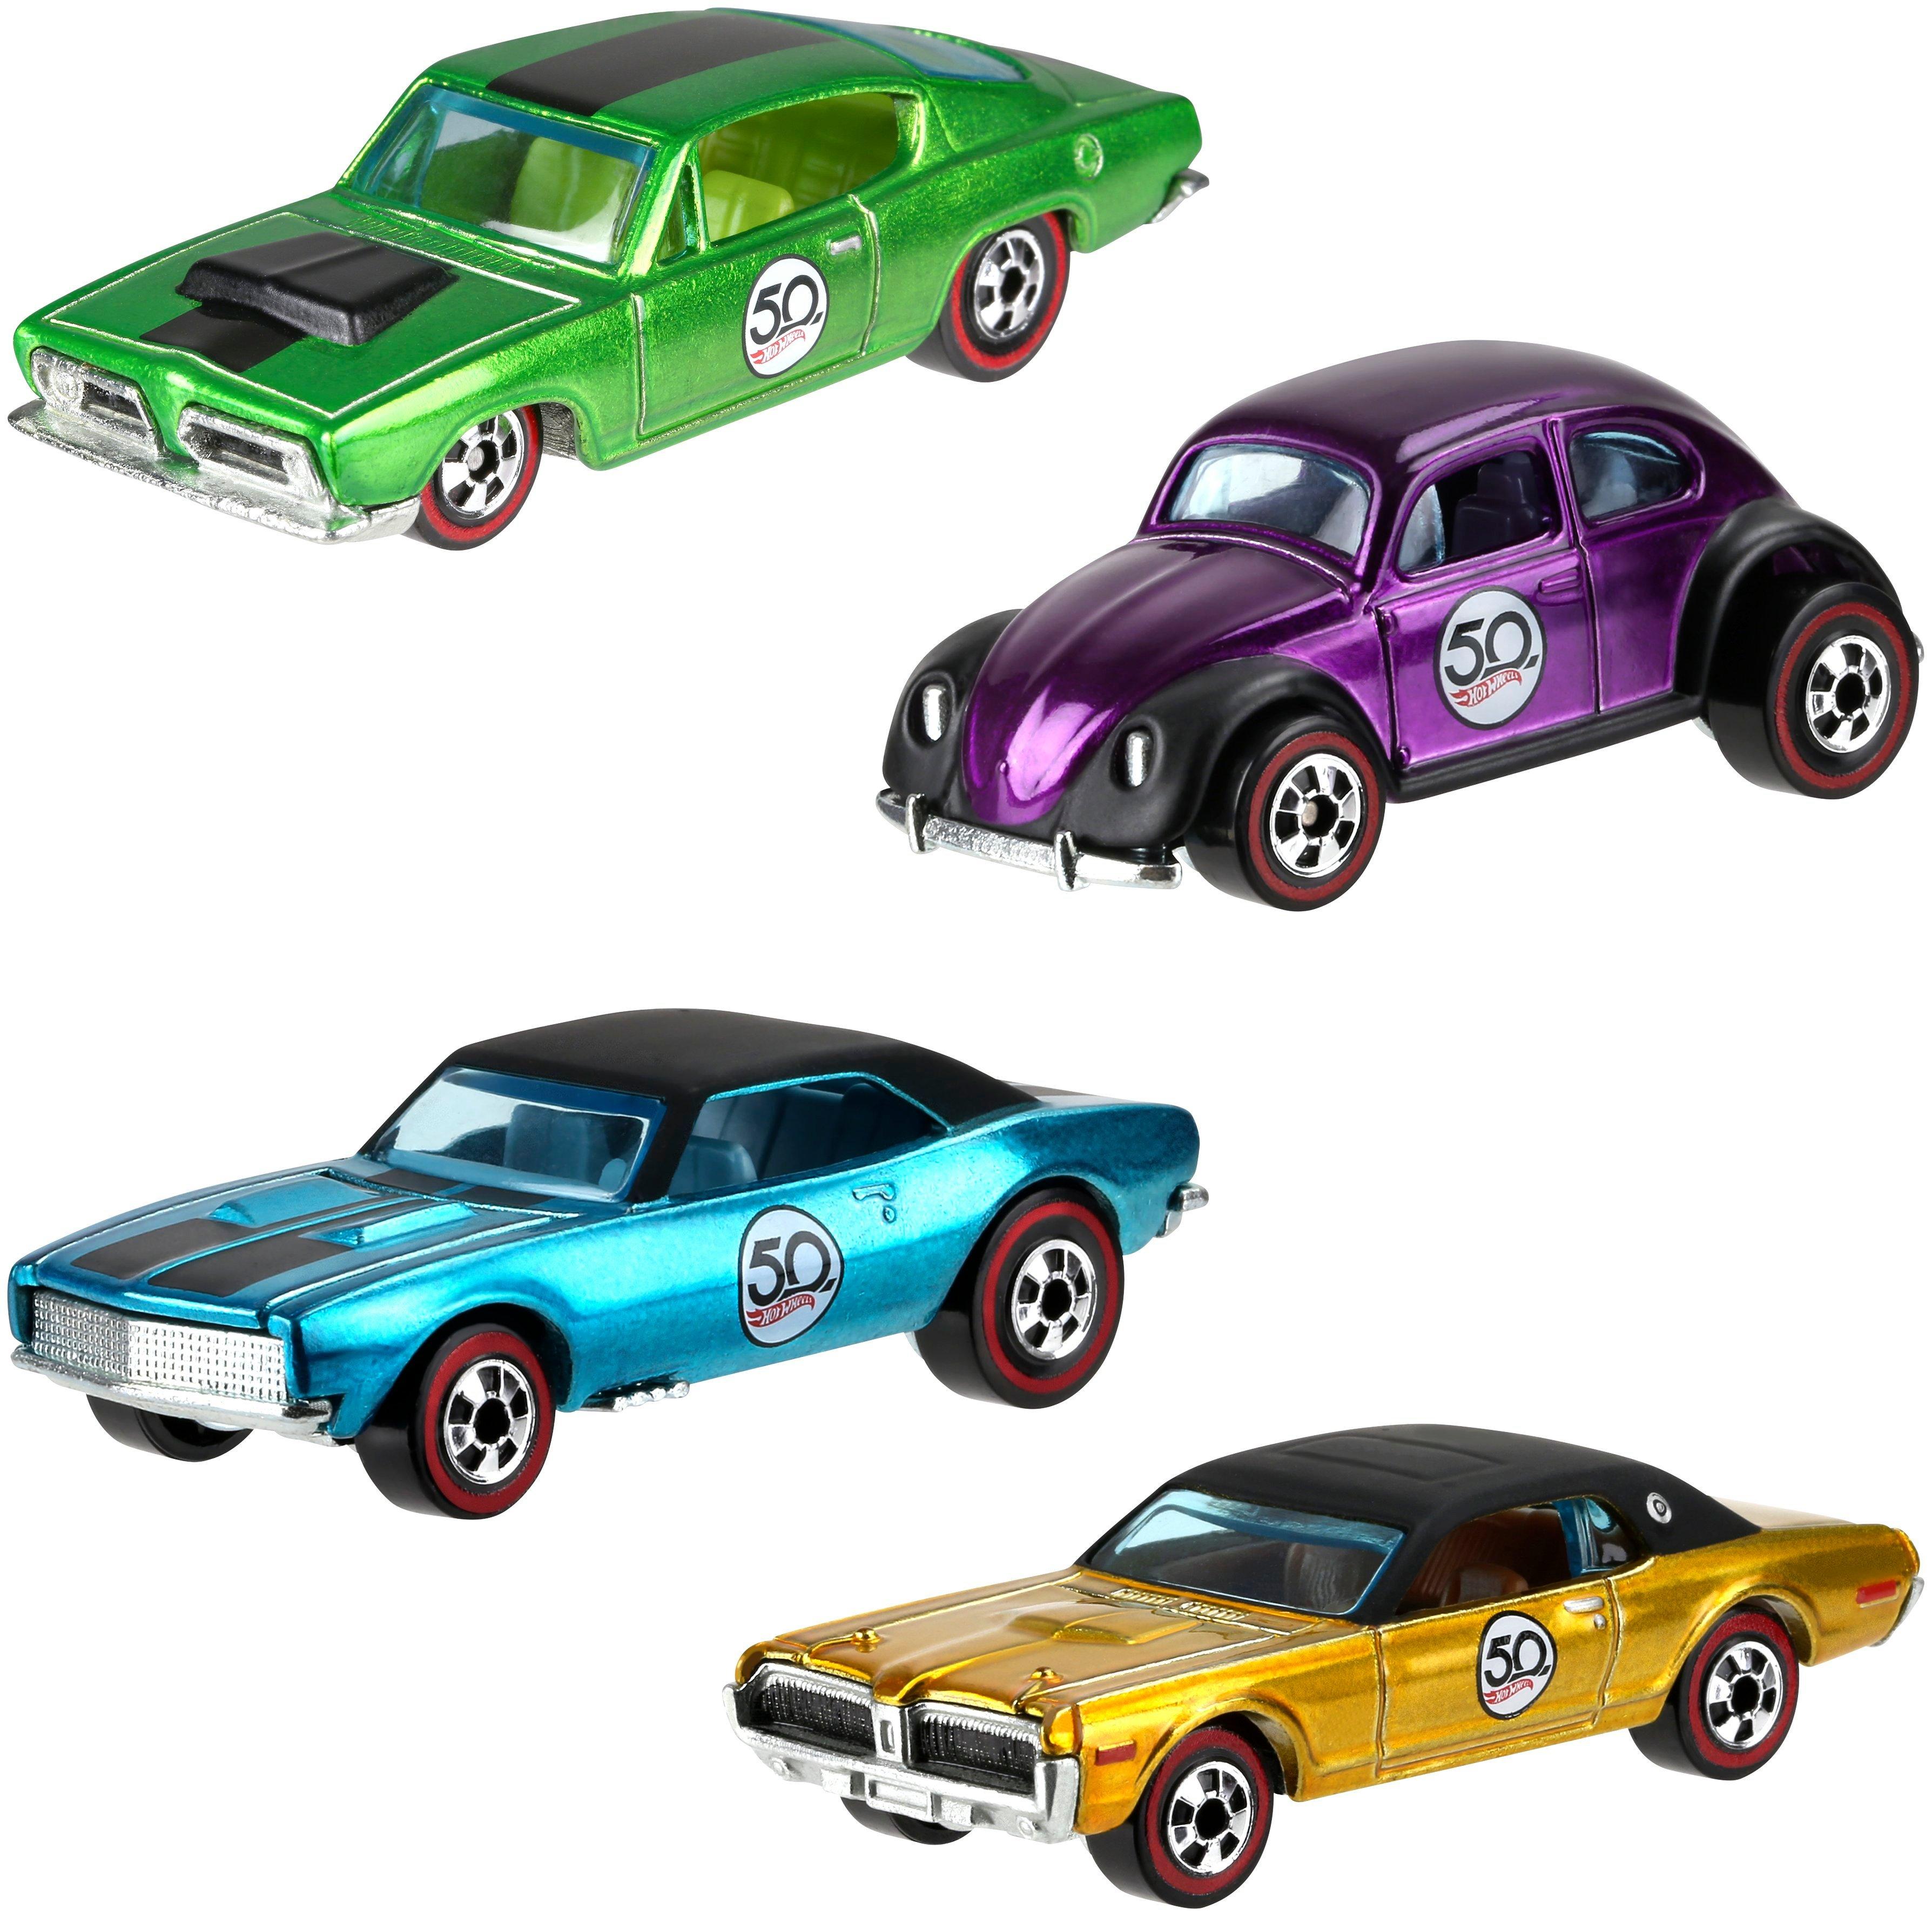 Images 41+ Hot Wheels Cars Videos ~ Hot Wheels Daily Collection Gallery